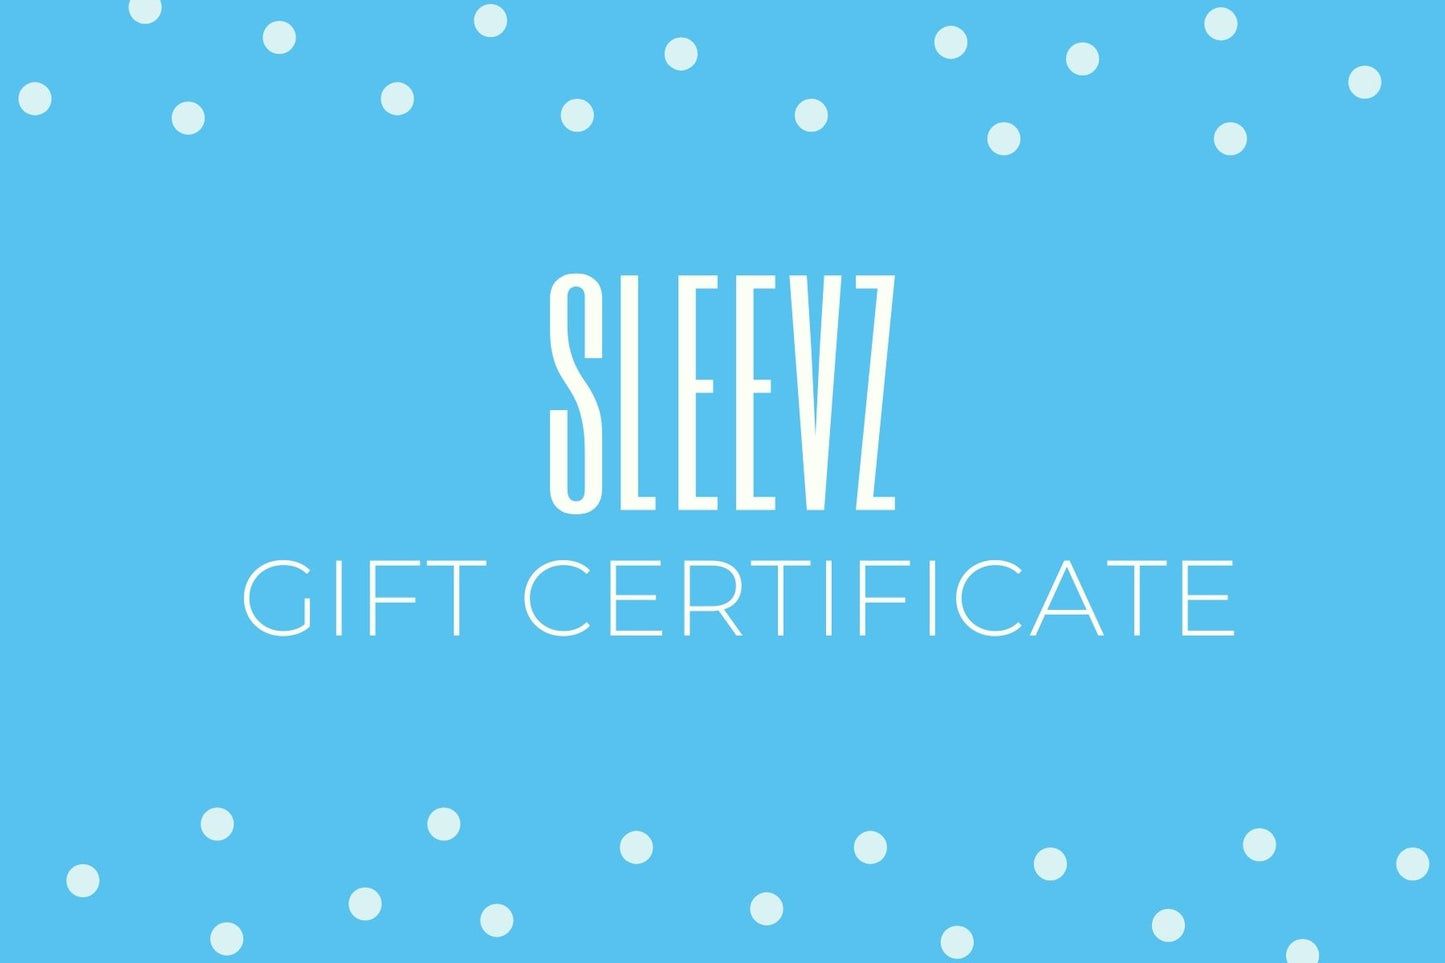 SLEEVZ Gift Certificate The best gift this holiday season.   Allow your loved ones to have fog-free glasses while wearing their mask.   The best gift for eyeglass wearers.  